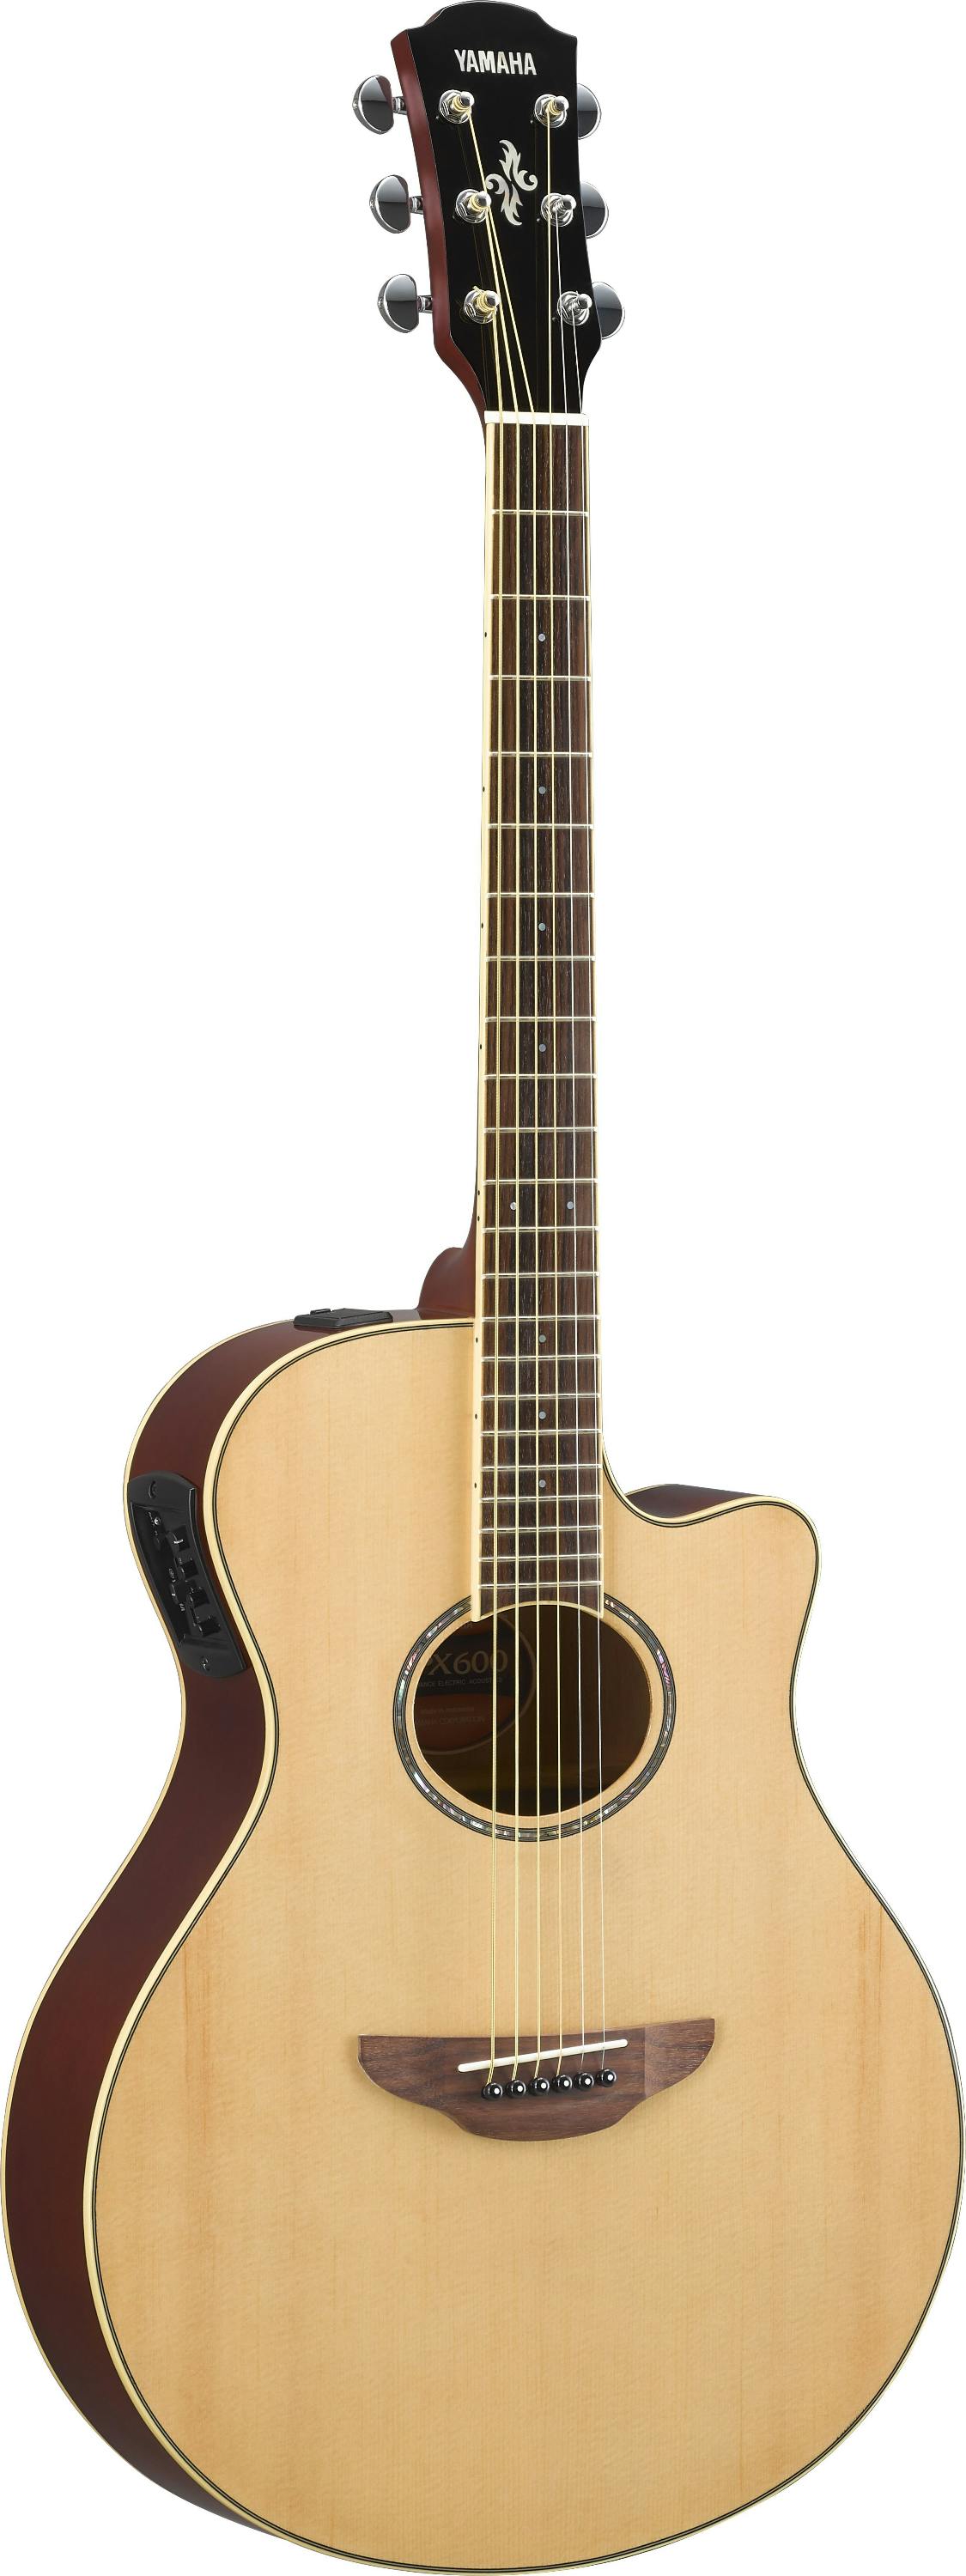 Yamaha APX Series Acoustic Guitars - Andertons Music Co.